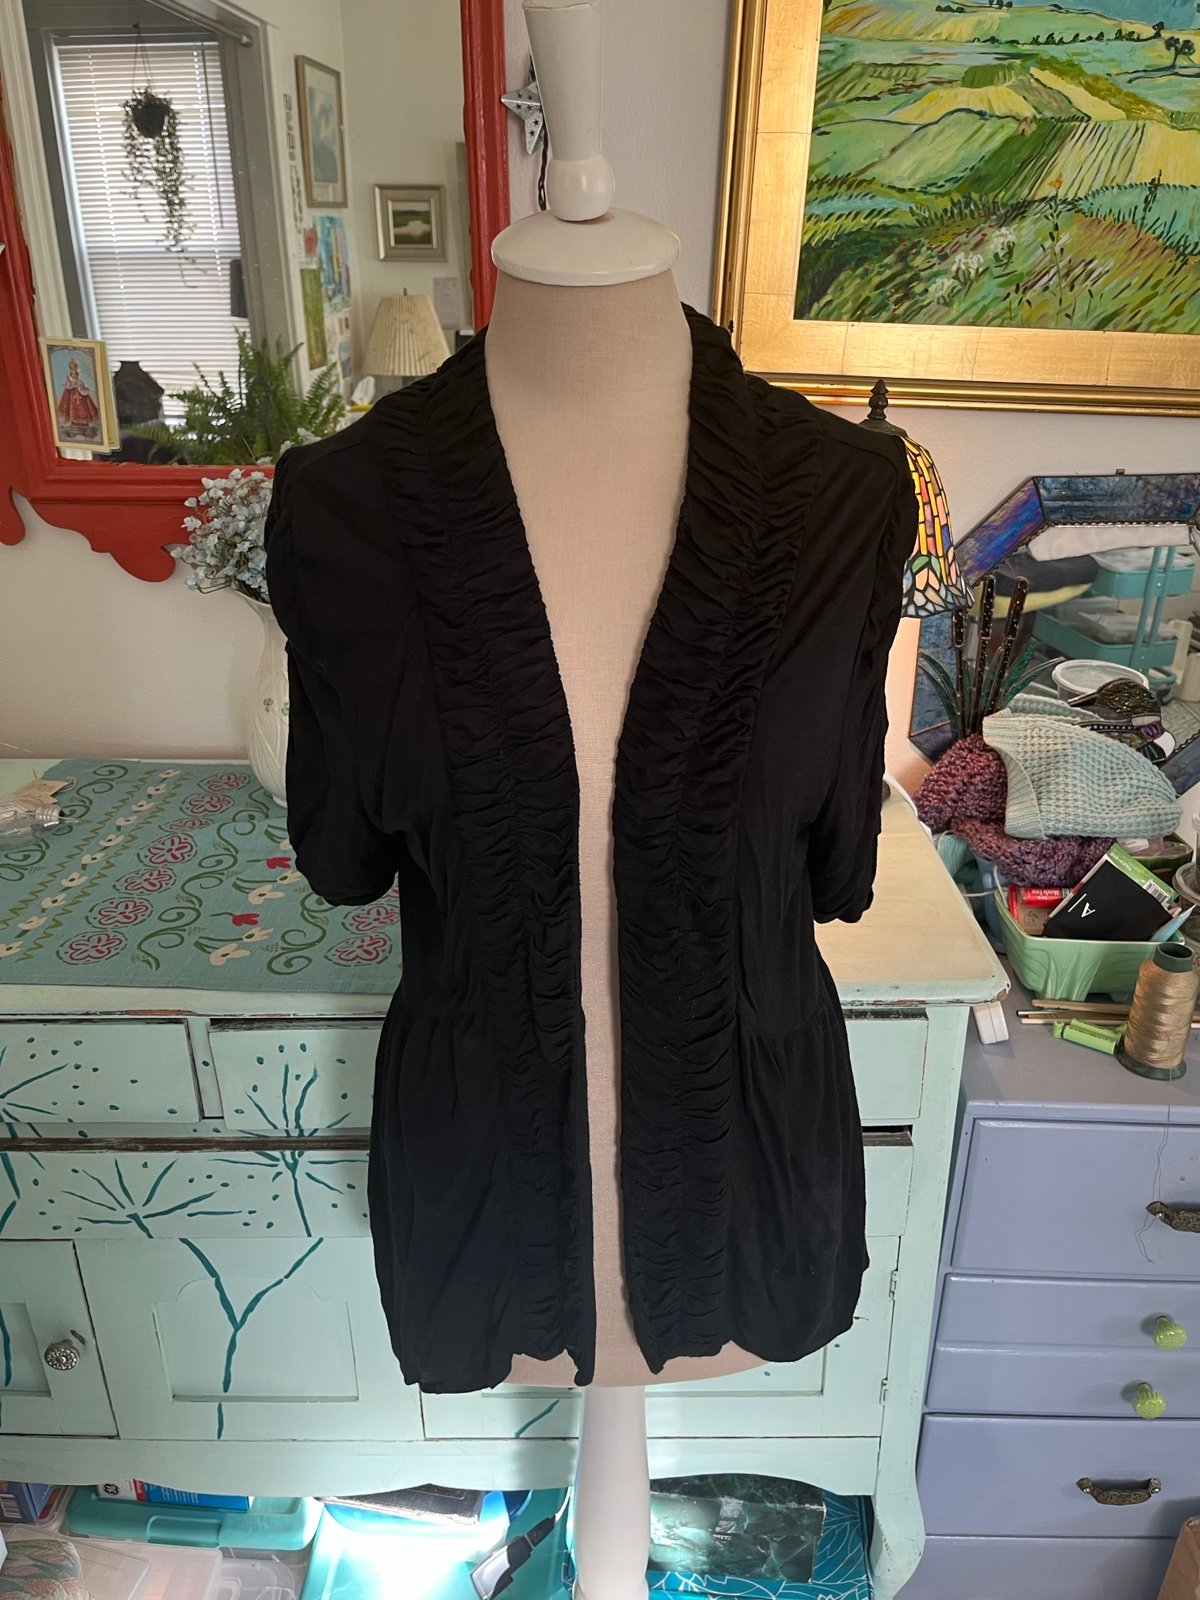 large selection Short Sleeve Cardigan Top L Black Rayon Fitted Open Front VGUC j1v57AQ3W Great